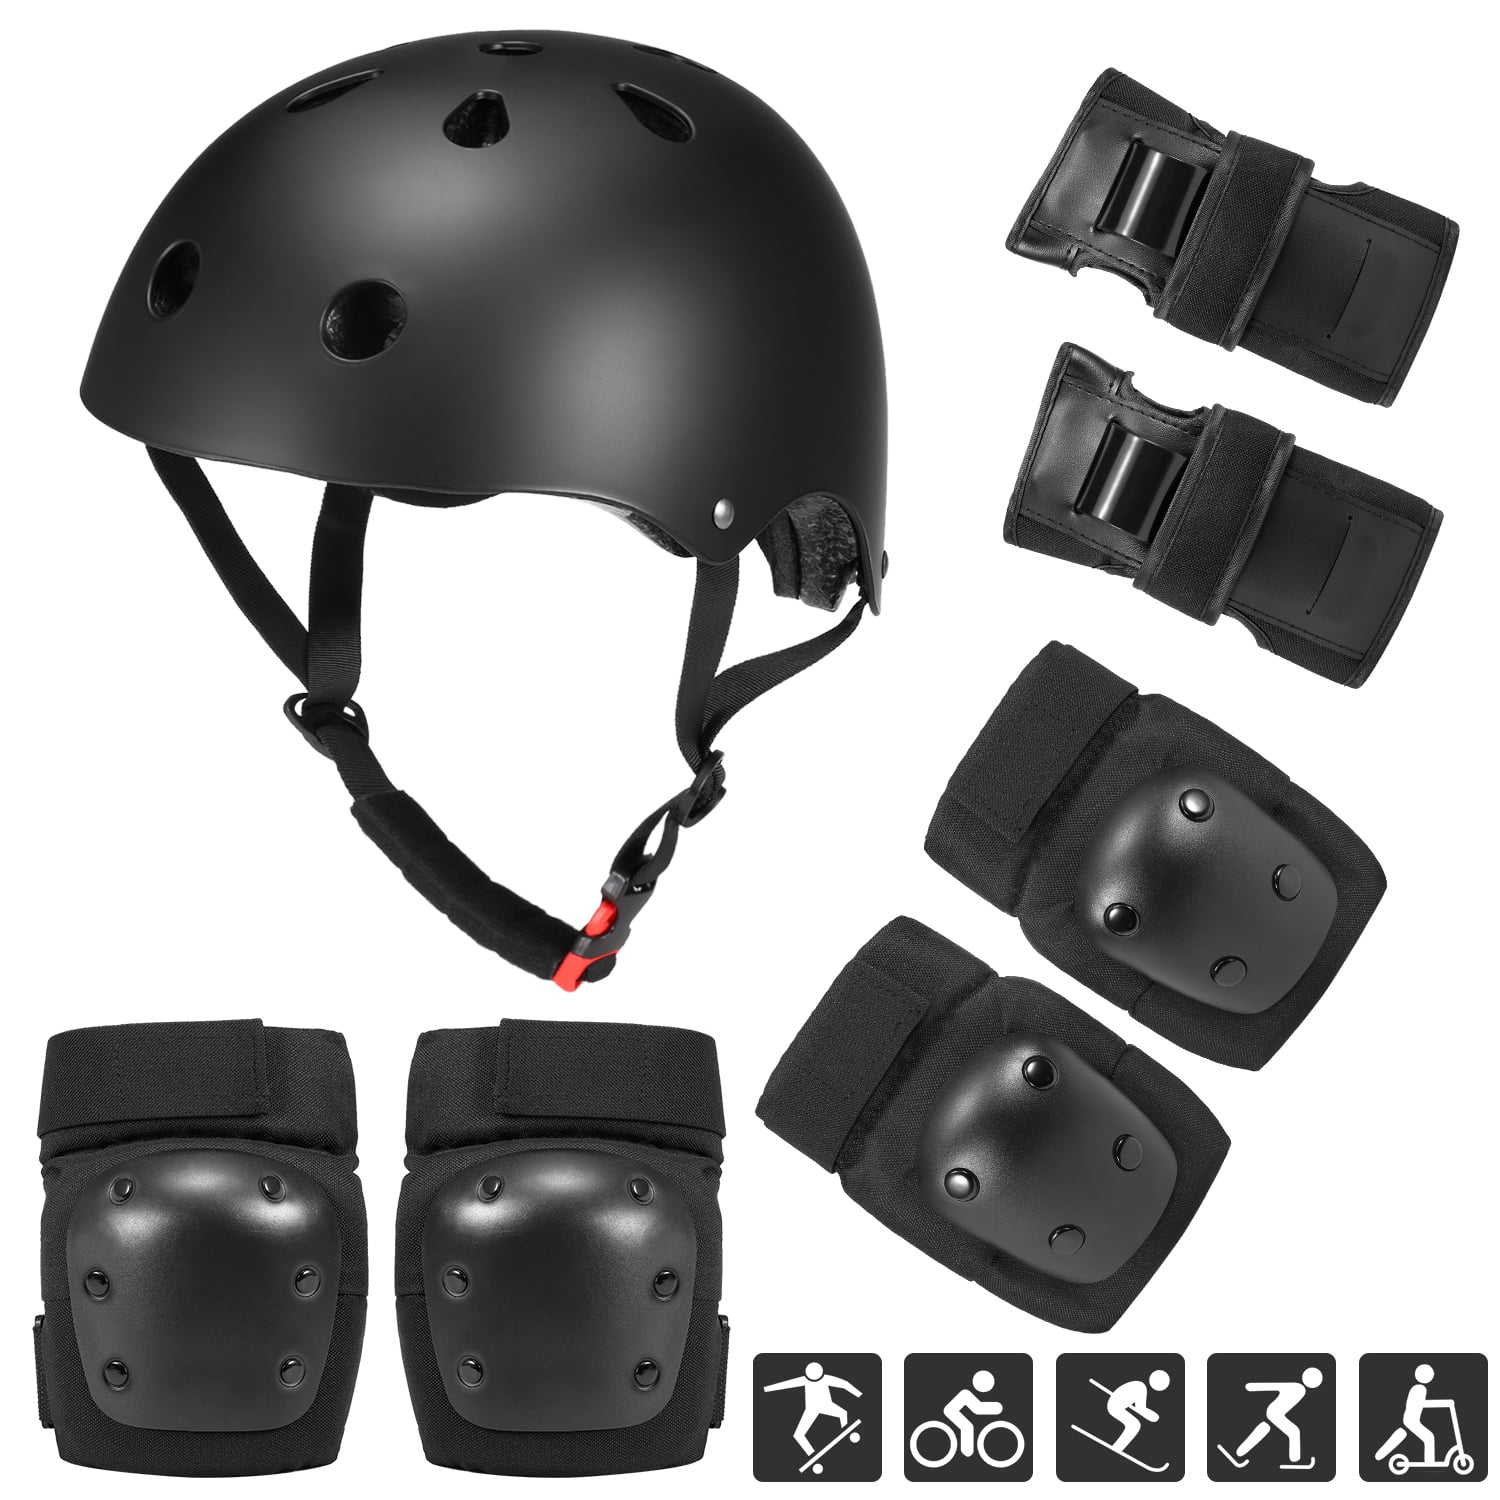 8 in 1 Adjustable Kids Bike Helmet with Knee and Elbow Pads Wrist Pads Blinkers for Roller Scooter Cycling Skating JOLIGAEA Kids Skateboard Bike Helmet Protective Gear Set and Pads Set